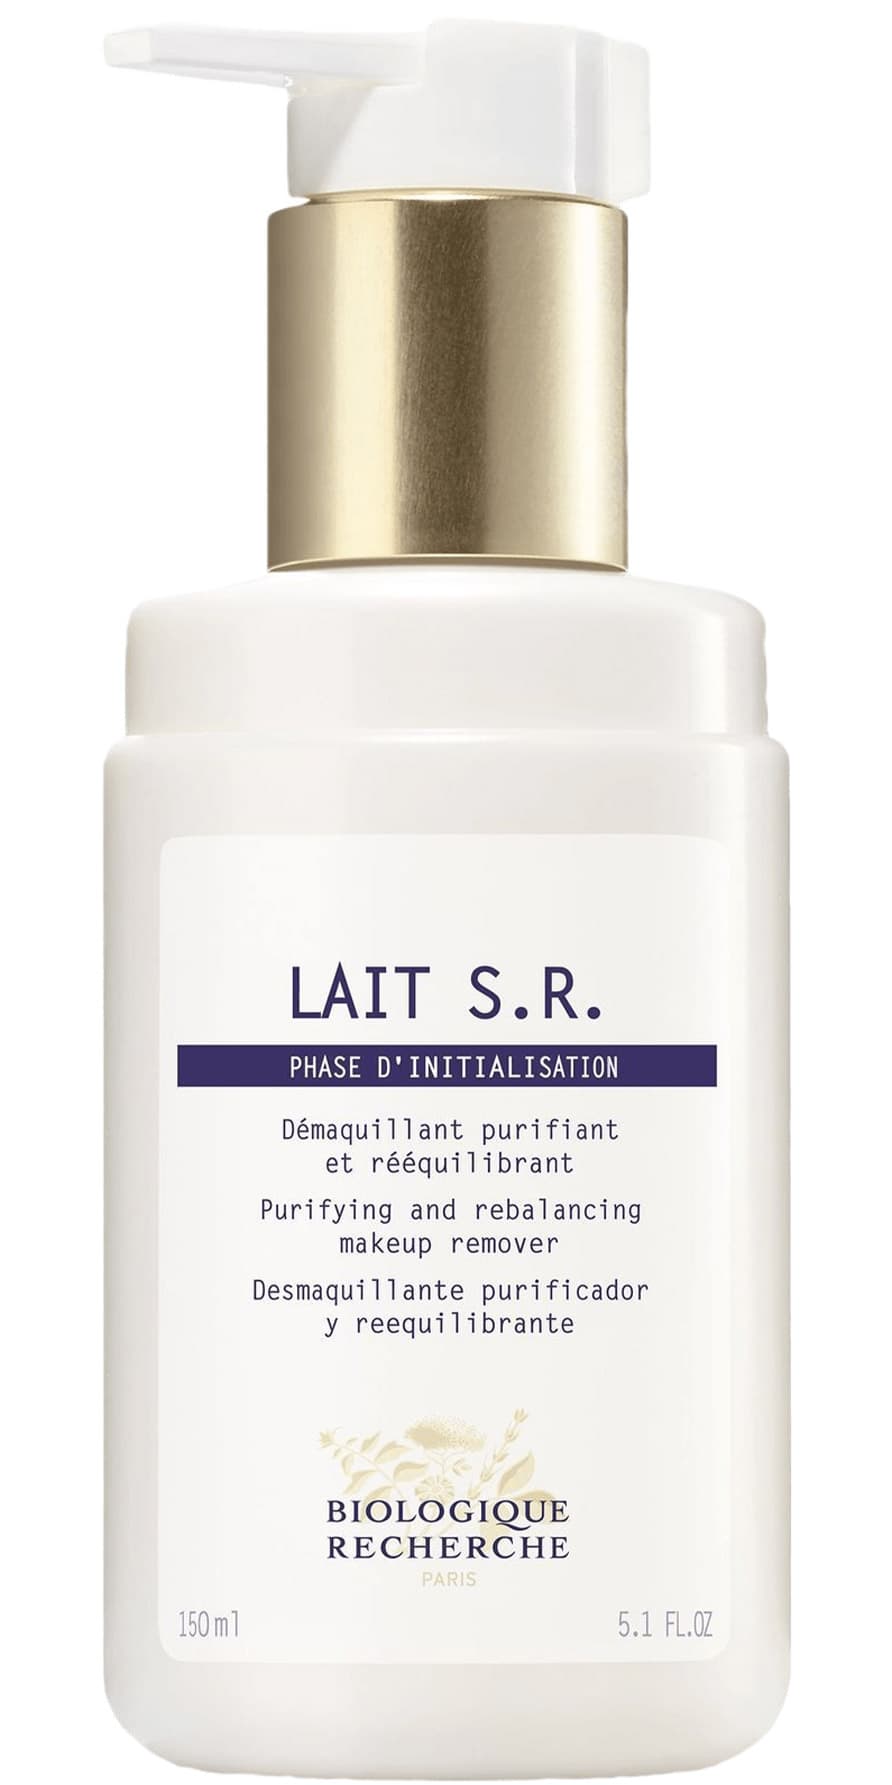 variant-150ml-product-page-image